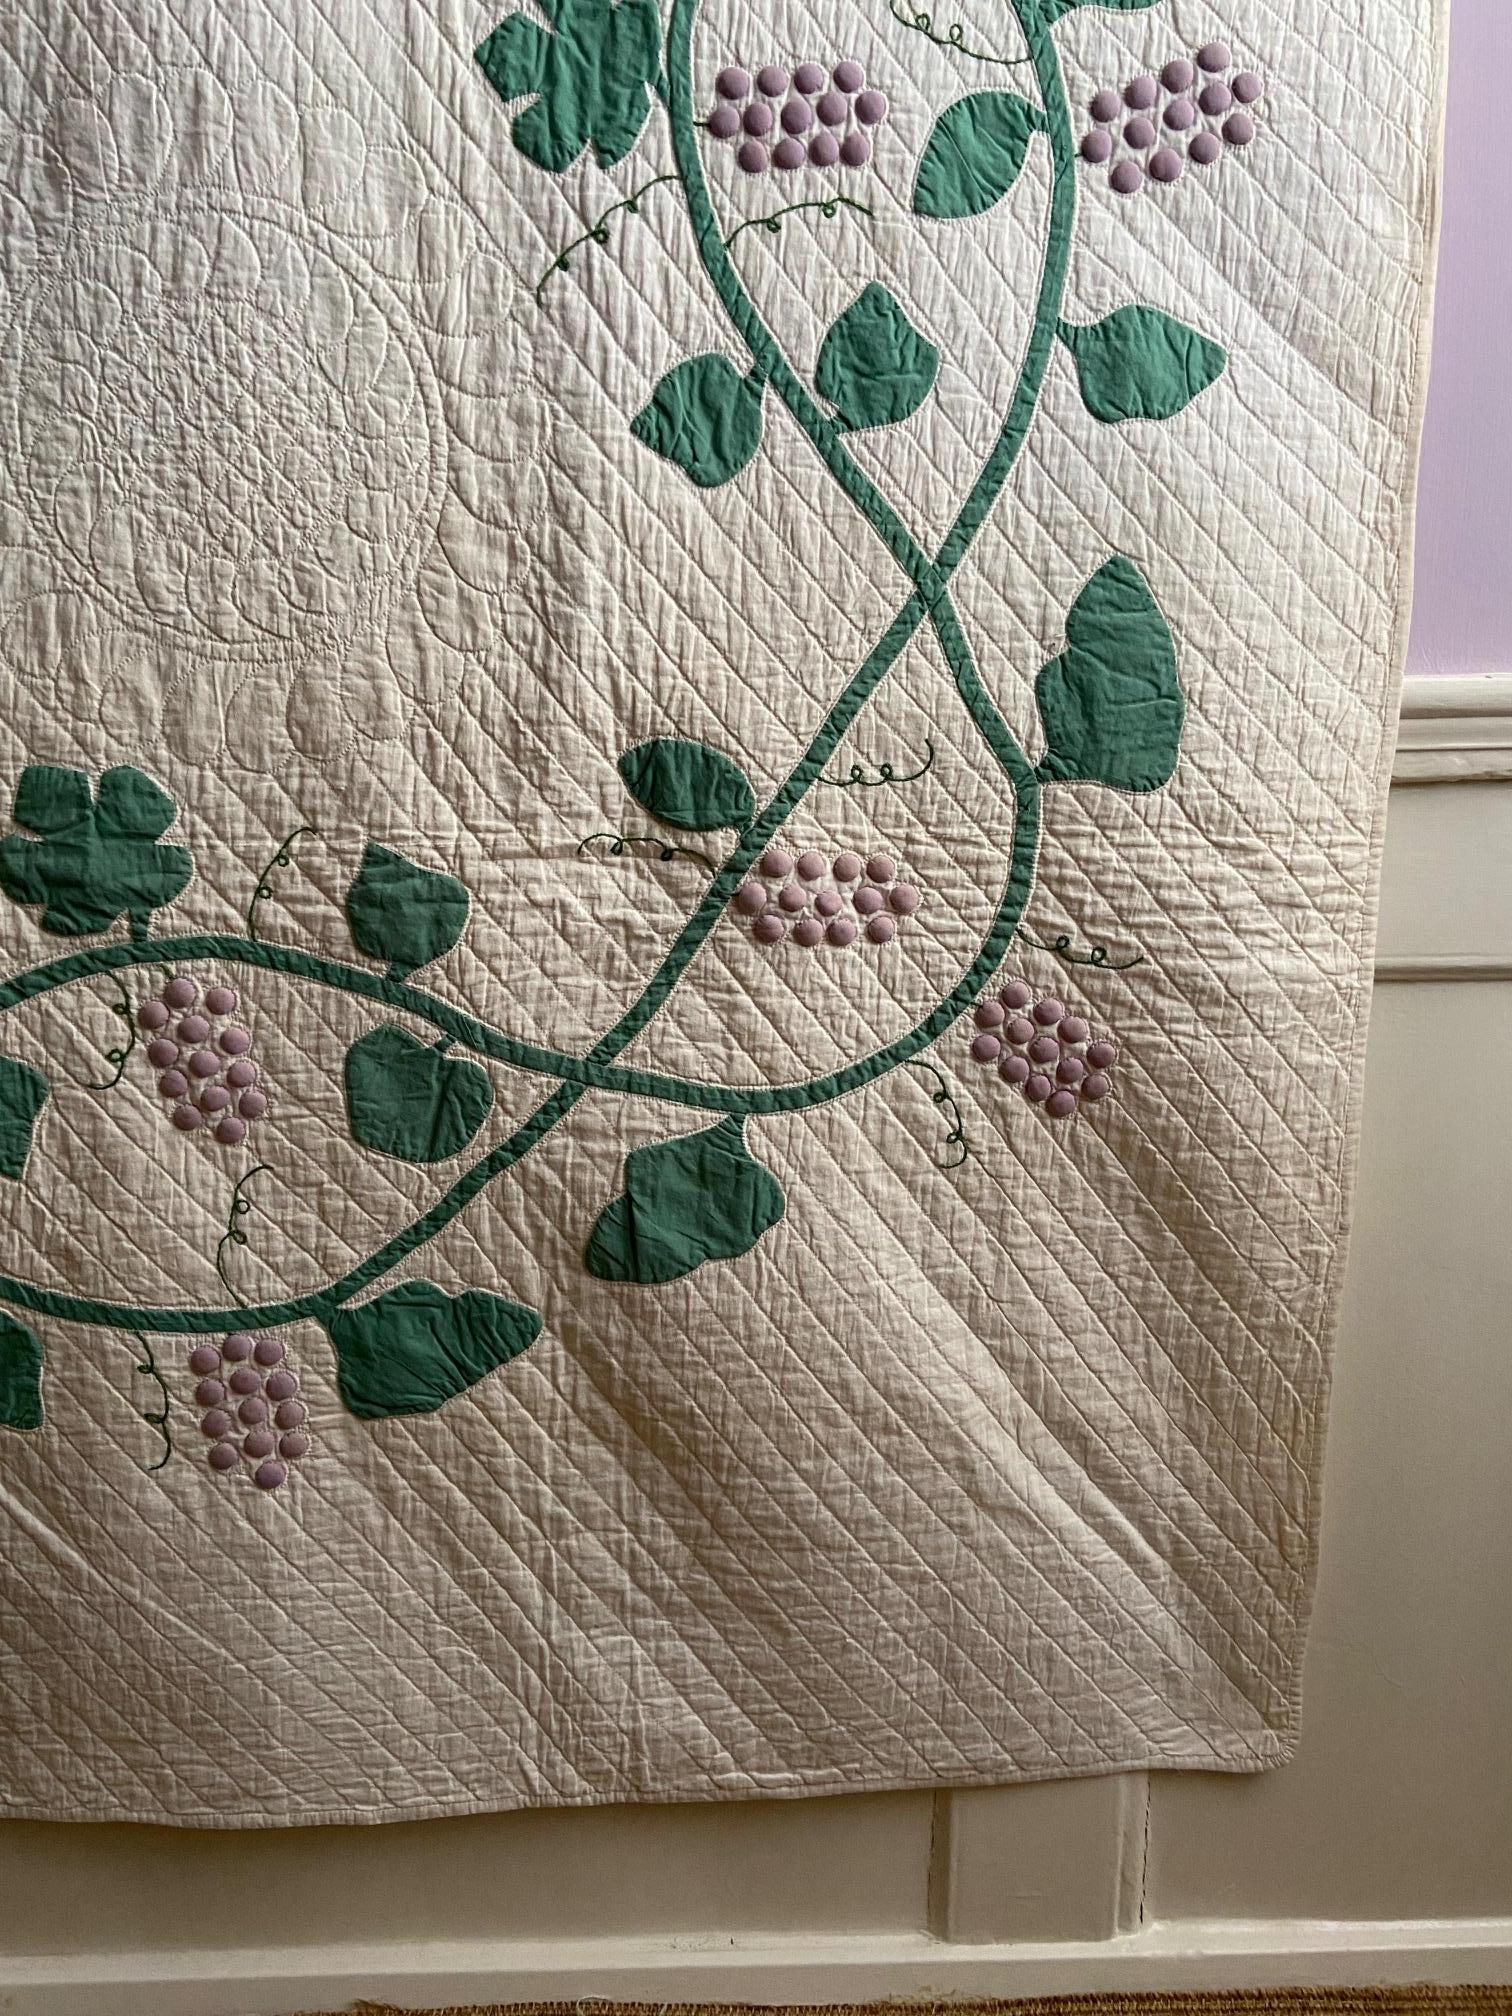 American Antique Cotton White and Purple “Grapes” Quilt, USA, 1920's